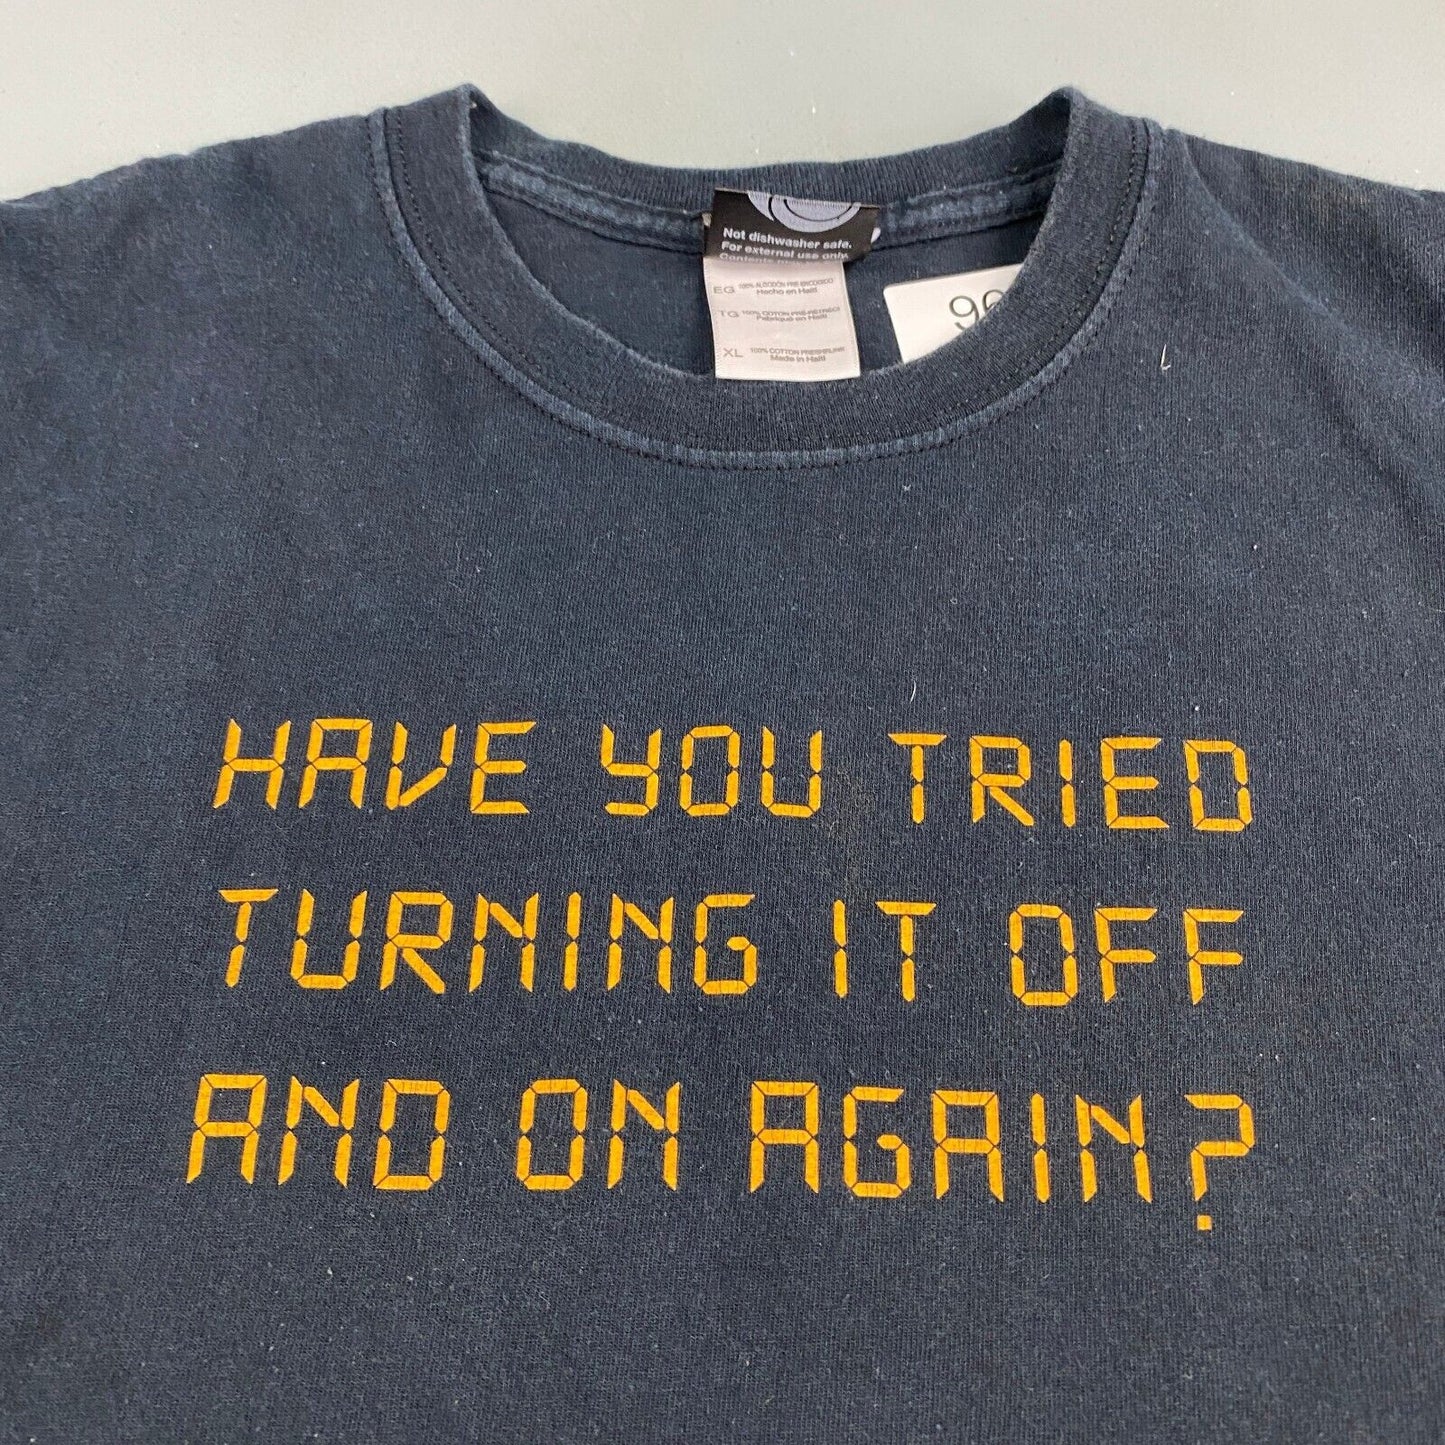 VINTAGE Have You Tried Turning It On & Off Again Black T-Shirt sz XL Mens Adult